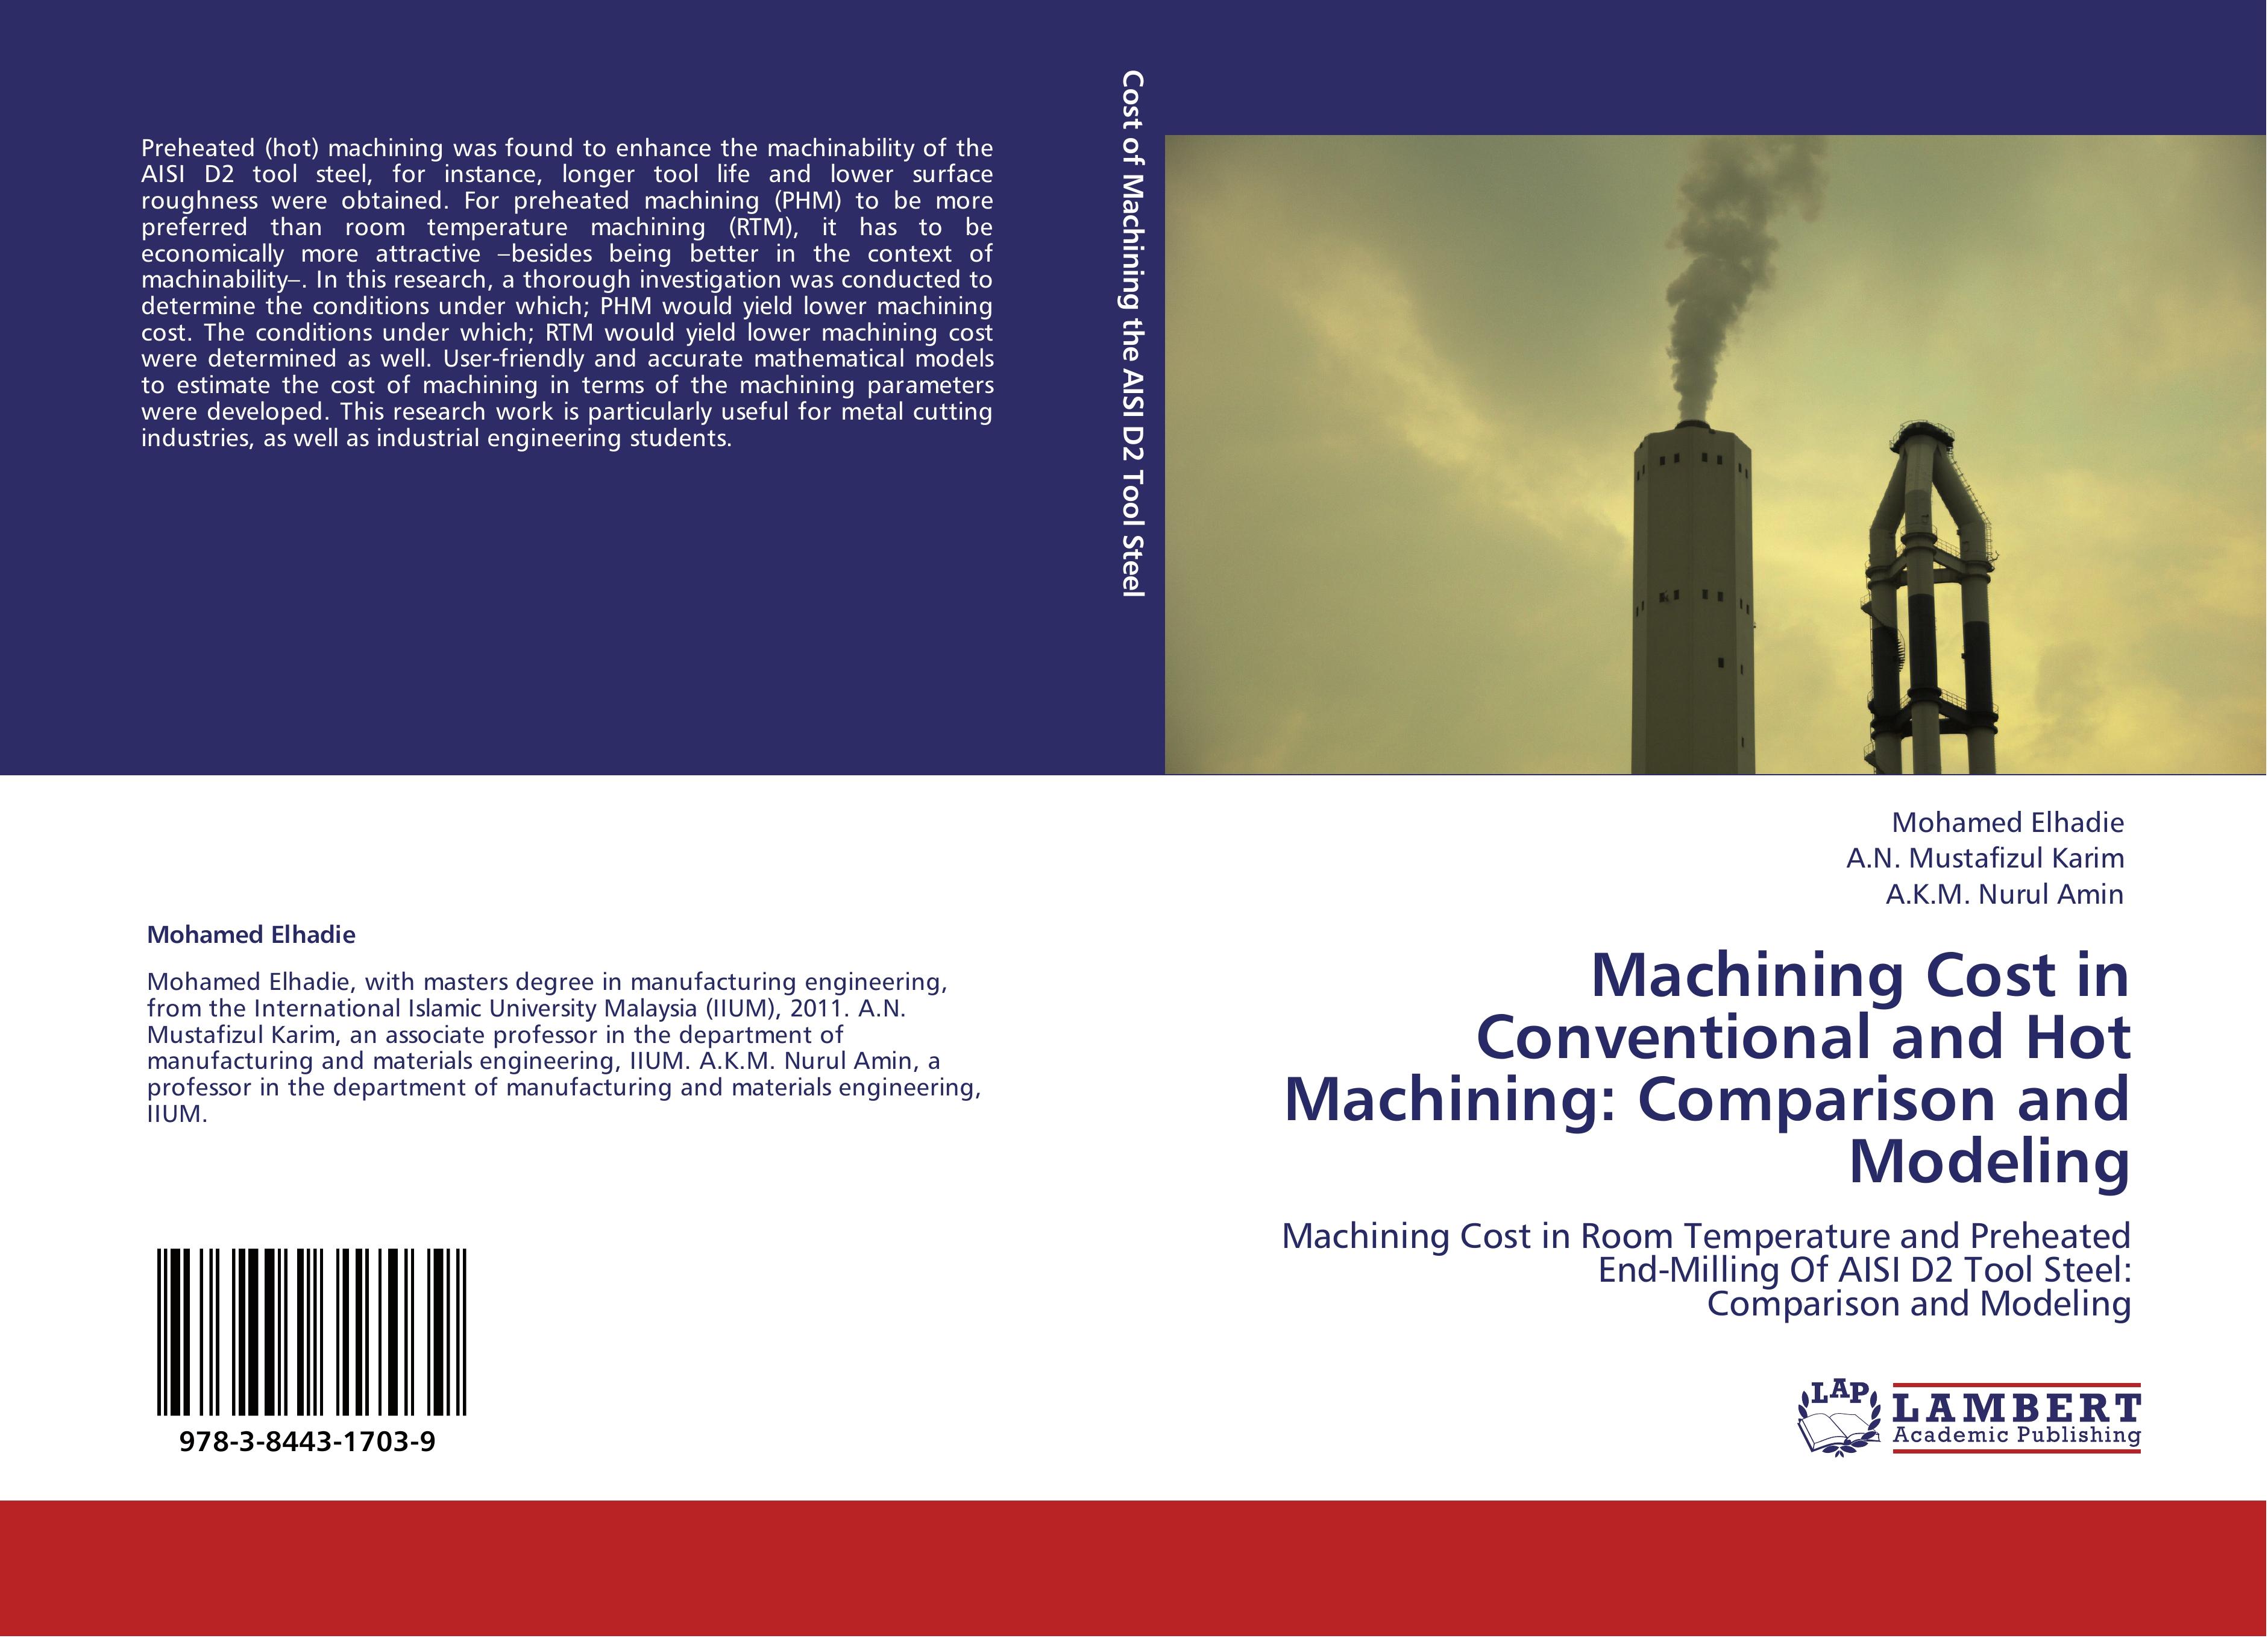 Machining Cost in Conventional and Hot Machining: Comparison and Modeling - Elhadie, Mohamed|Mustafizul Karim, A. N.|Nurul Amin, A. K. M.